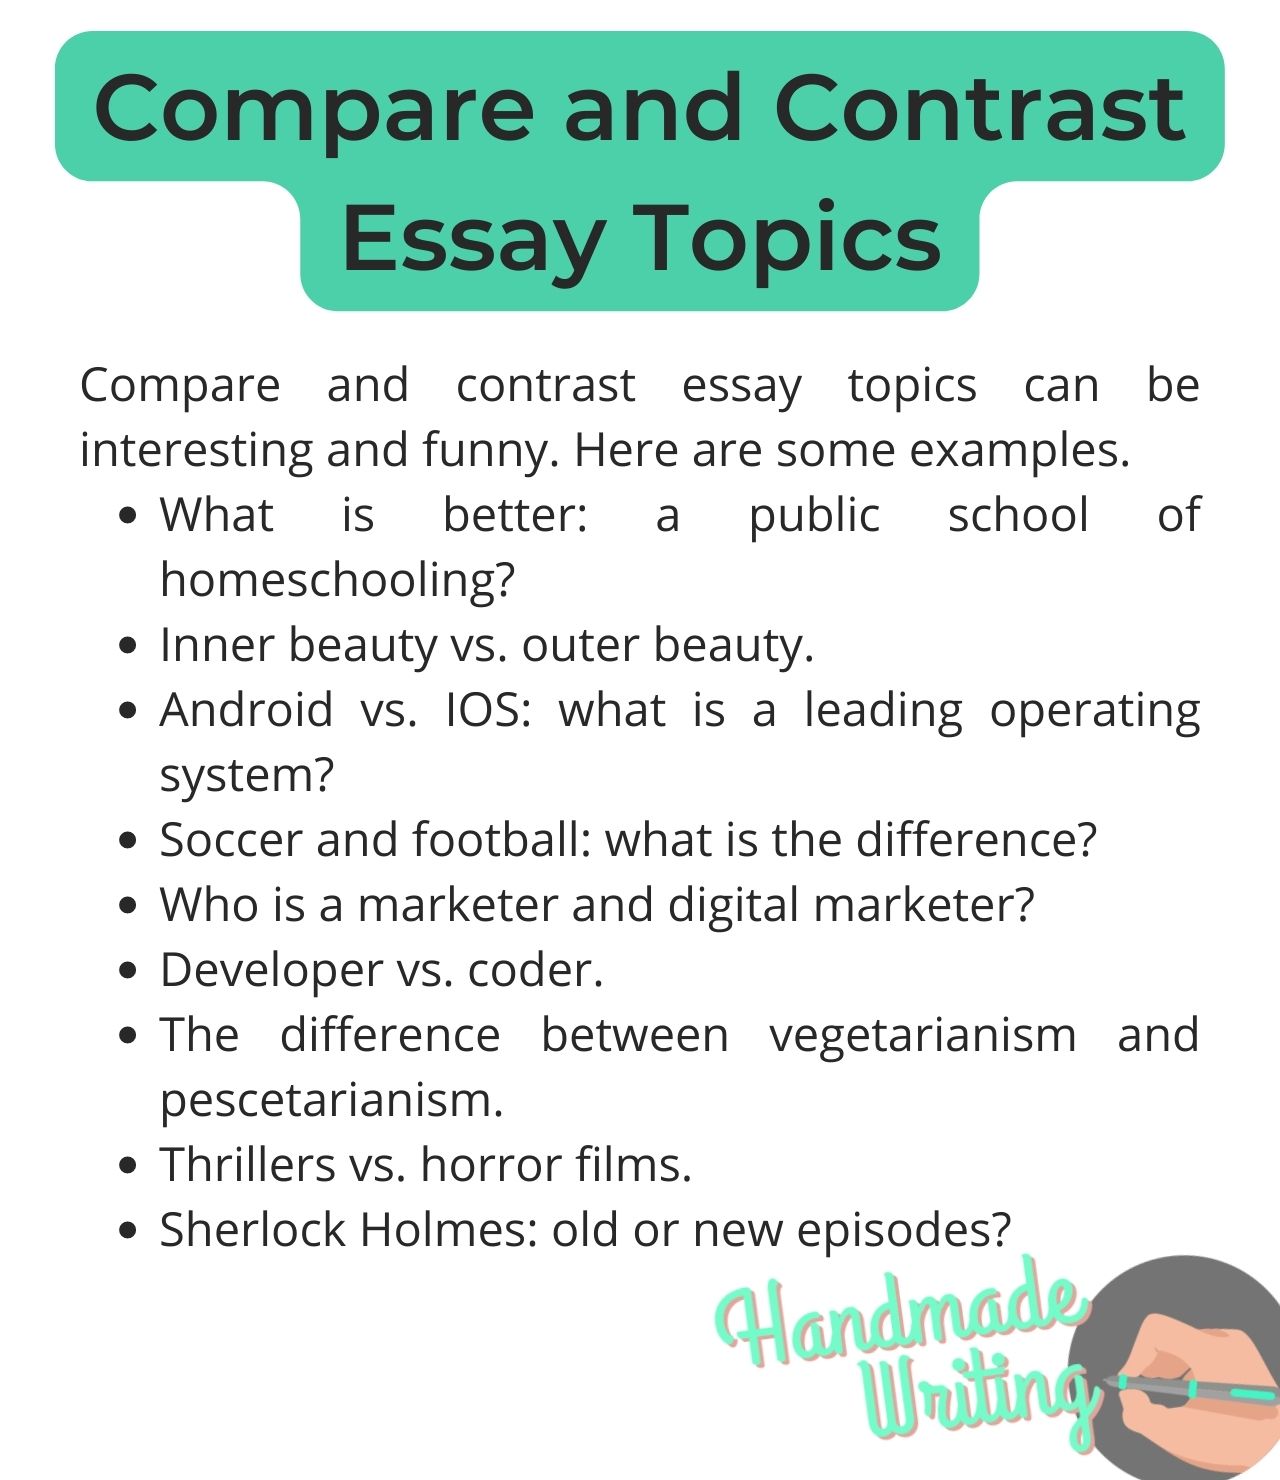 an example of comparison and contrast essay